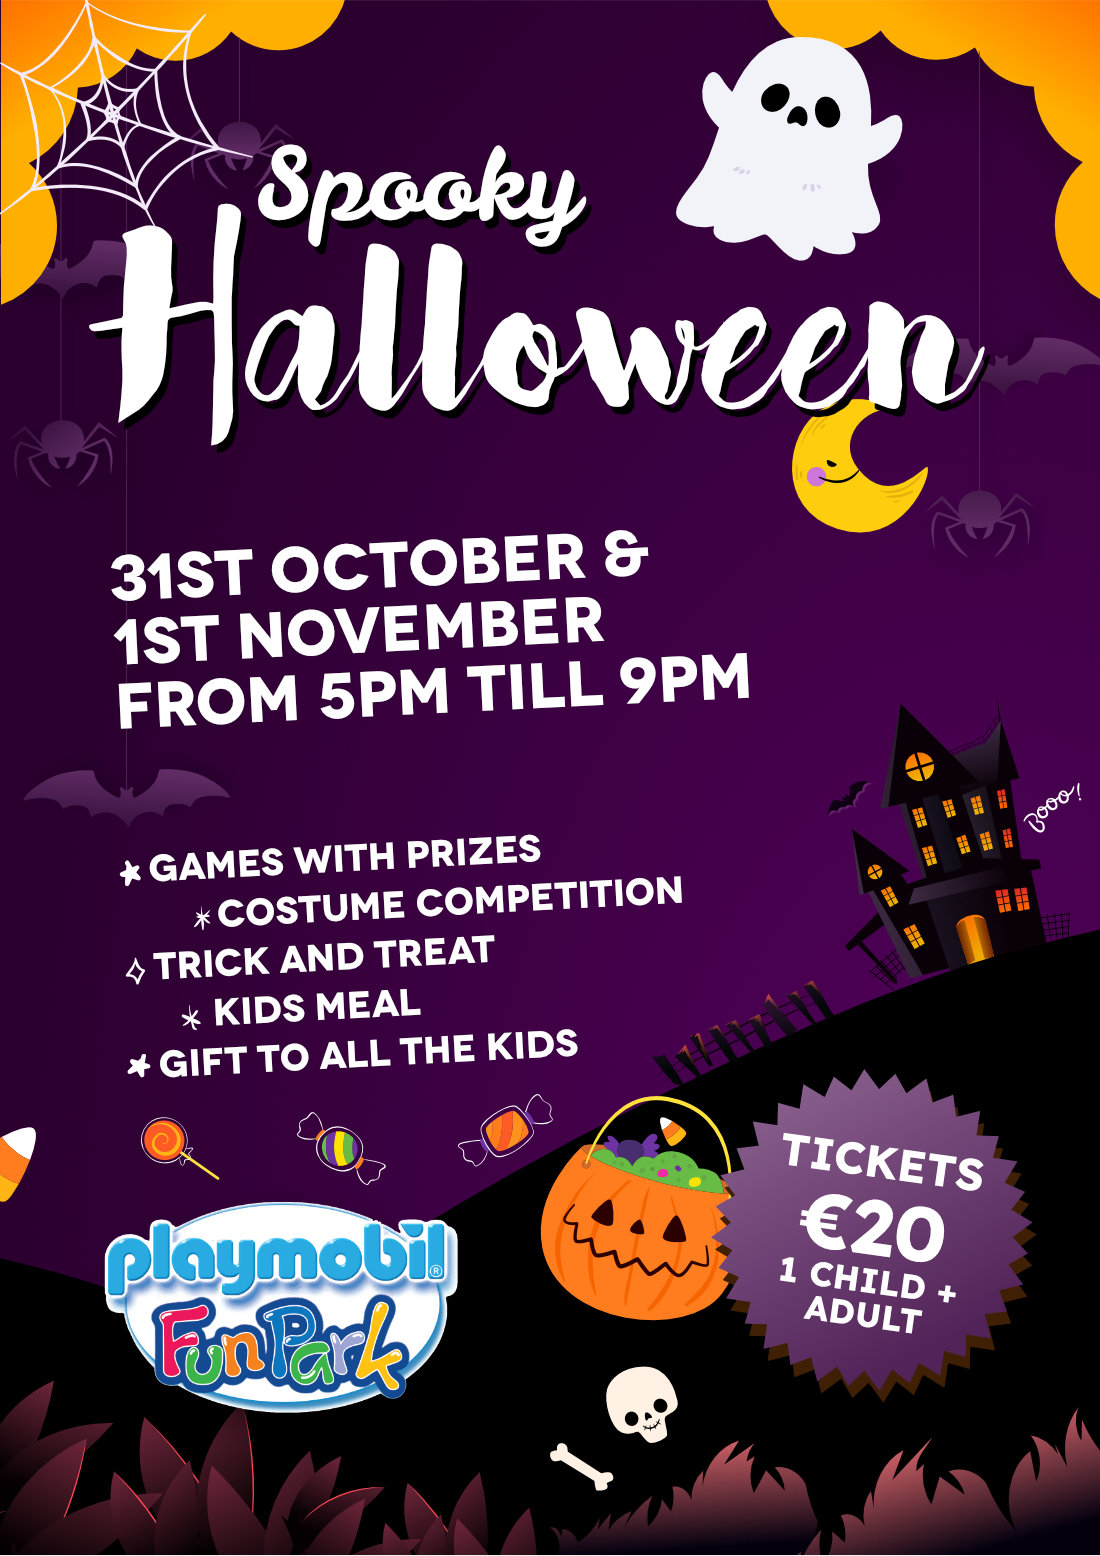 Spooky Halloween at Playmobil poster